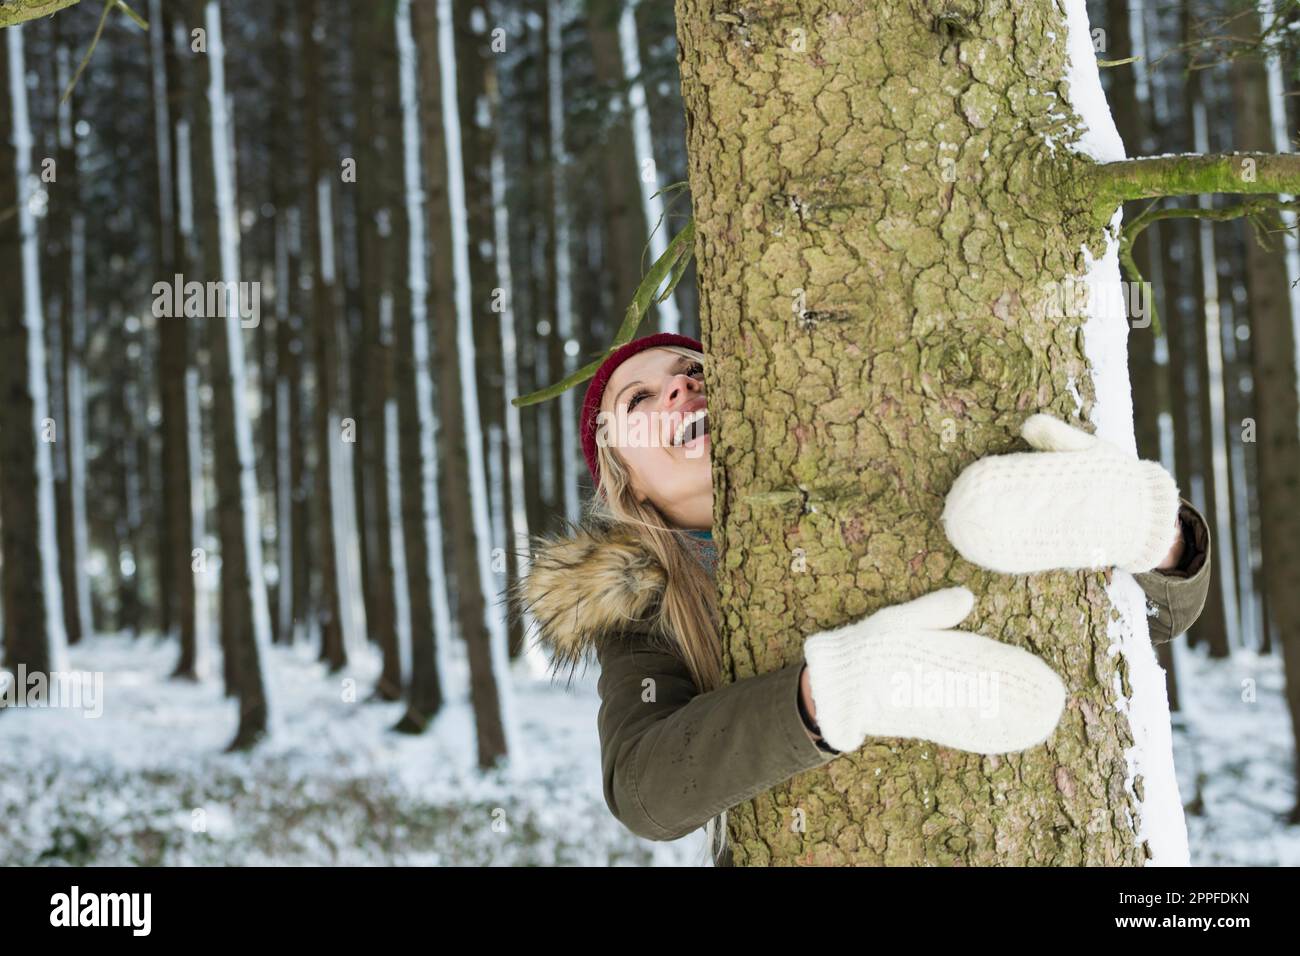 Teenage girl hugging a tree in a forest, Bavaria, Germany Stock Photo